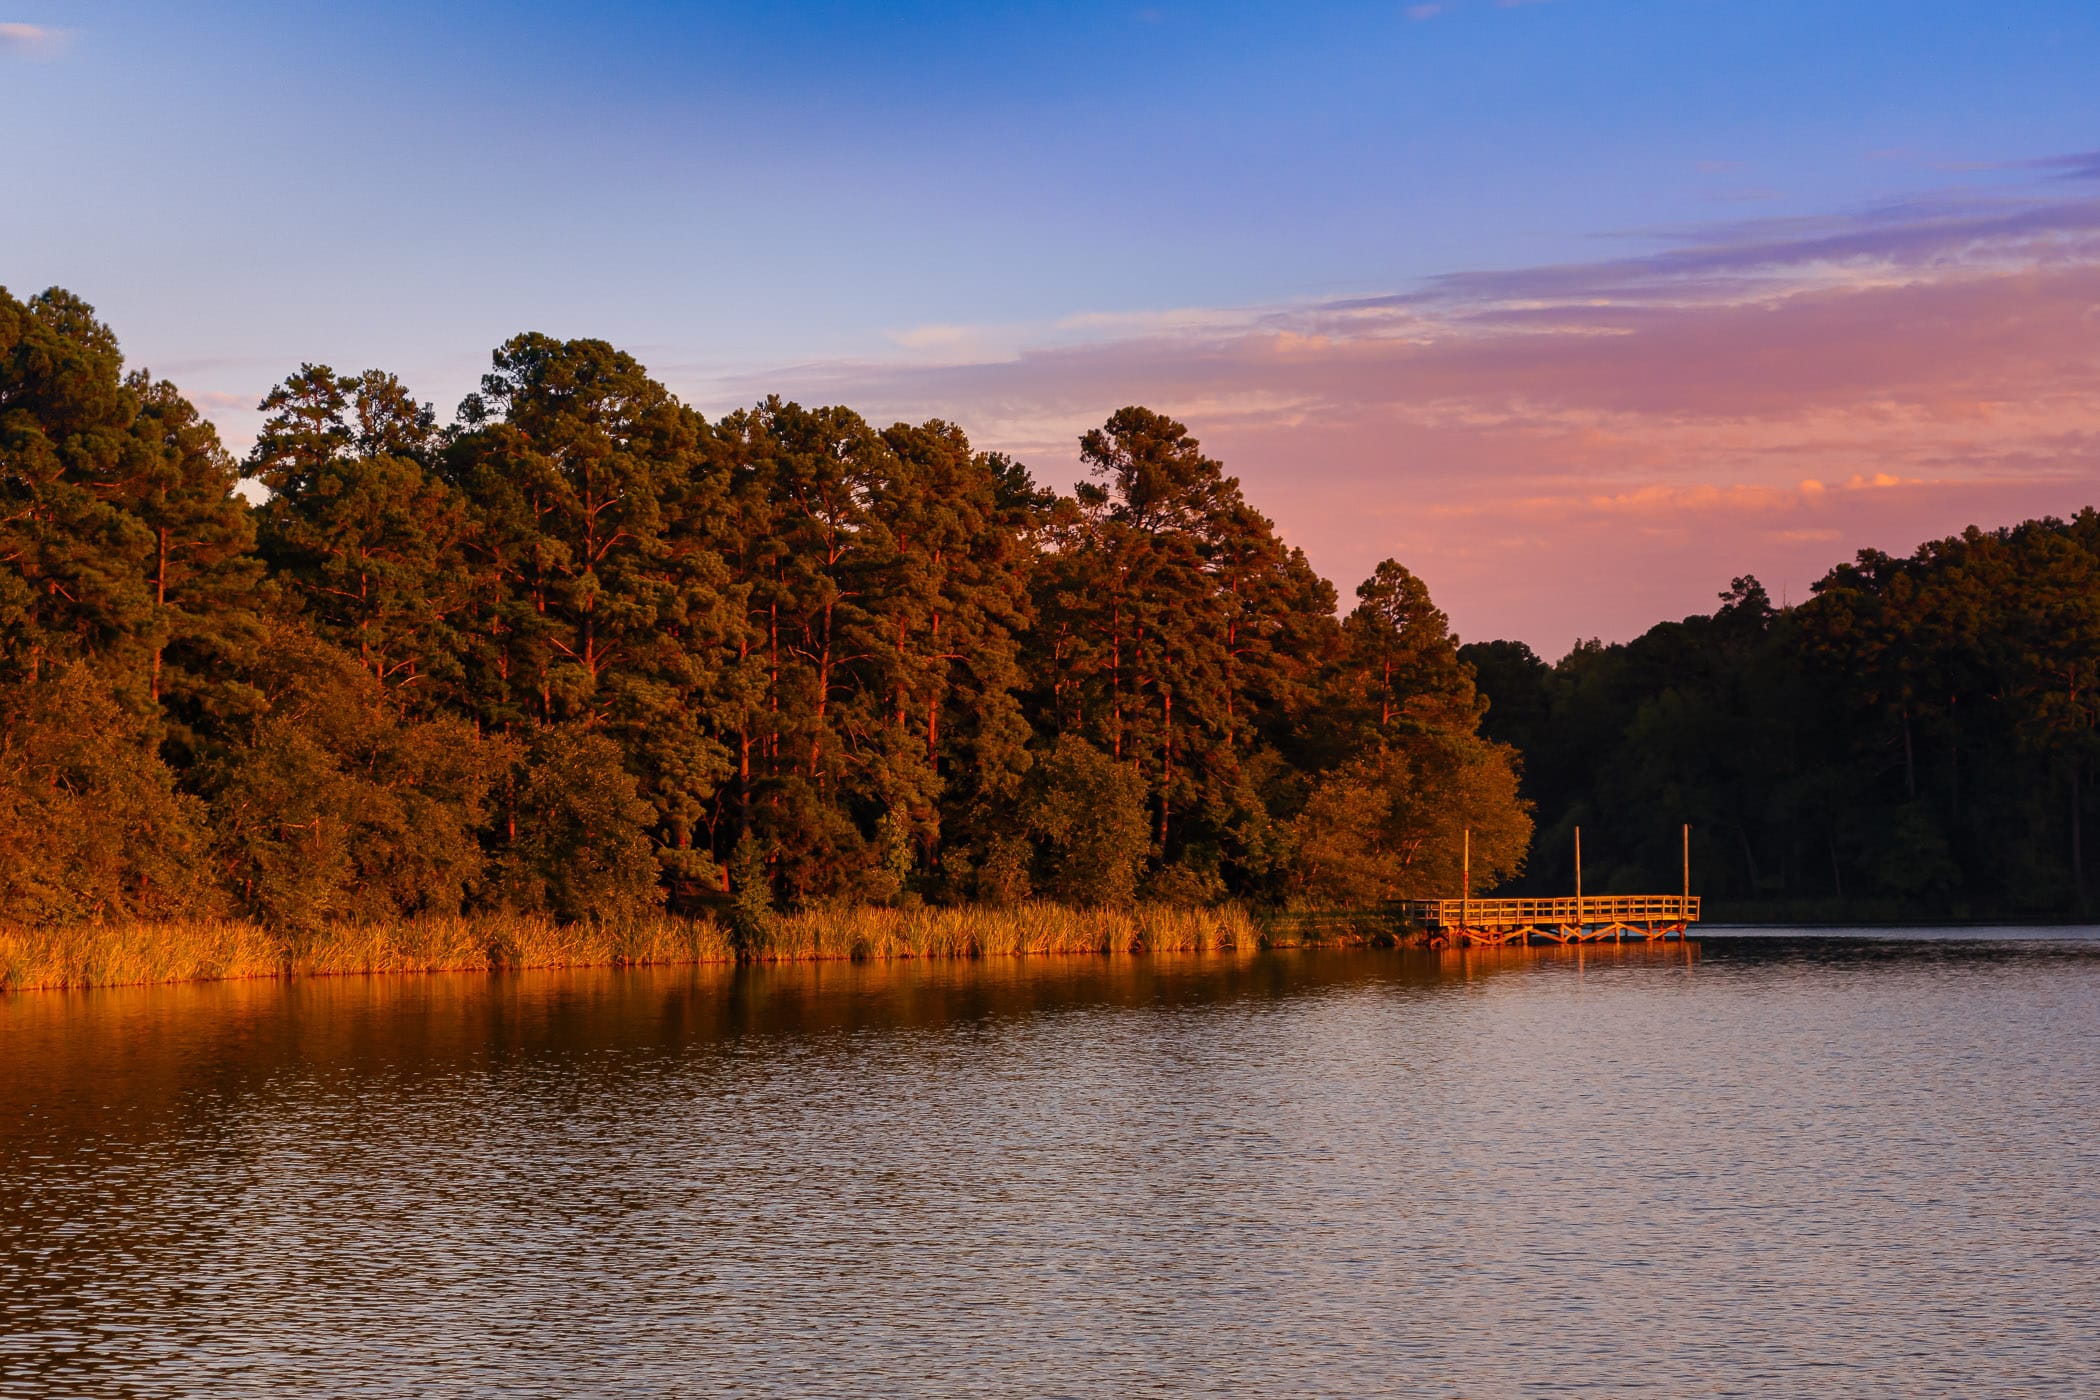 The late evening sun illuminates pine trees along the shoreline of the lake at Tyler State Park, Texas.